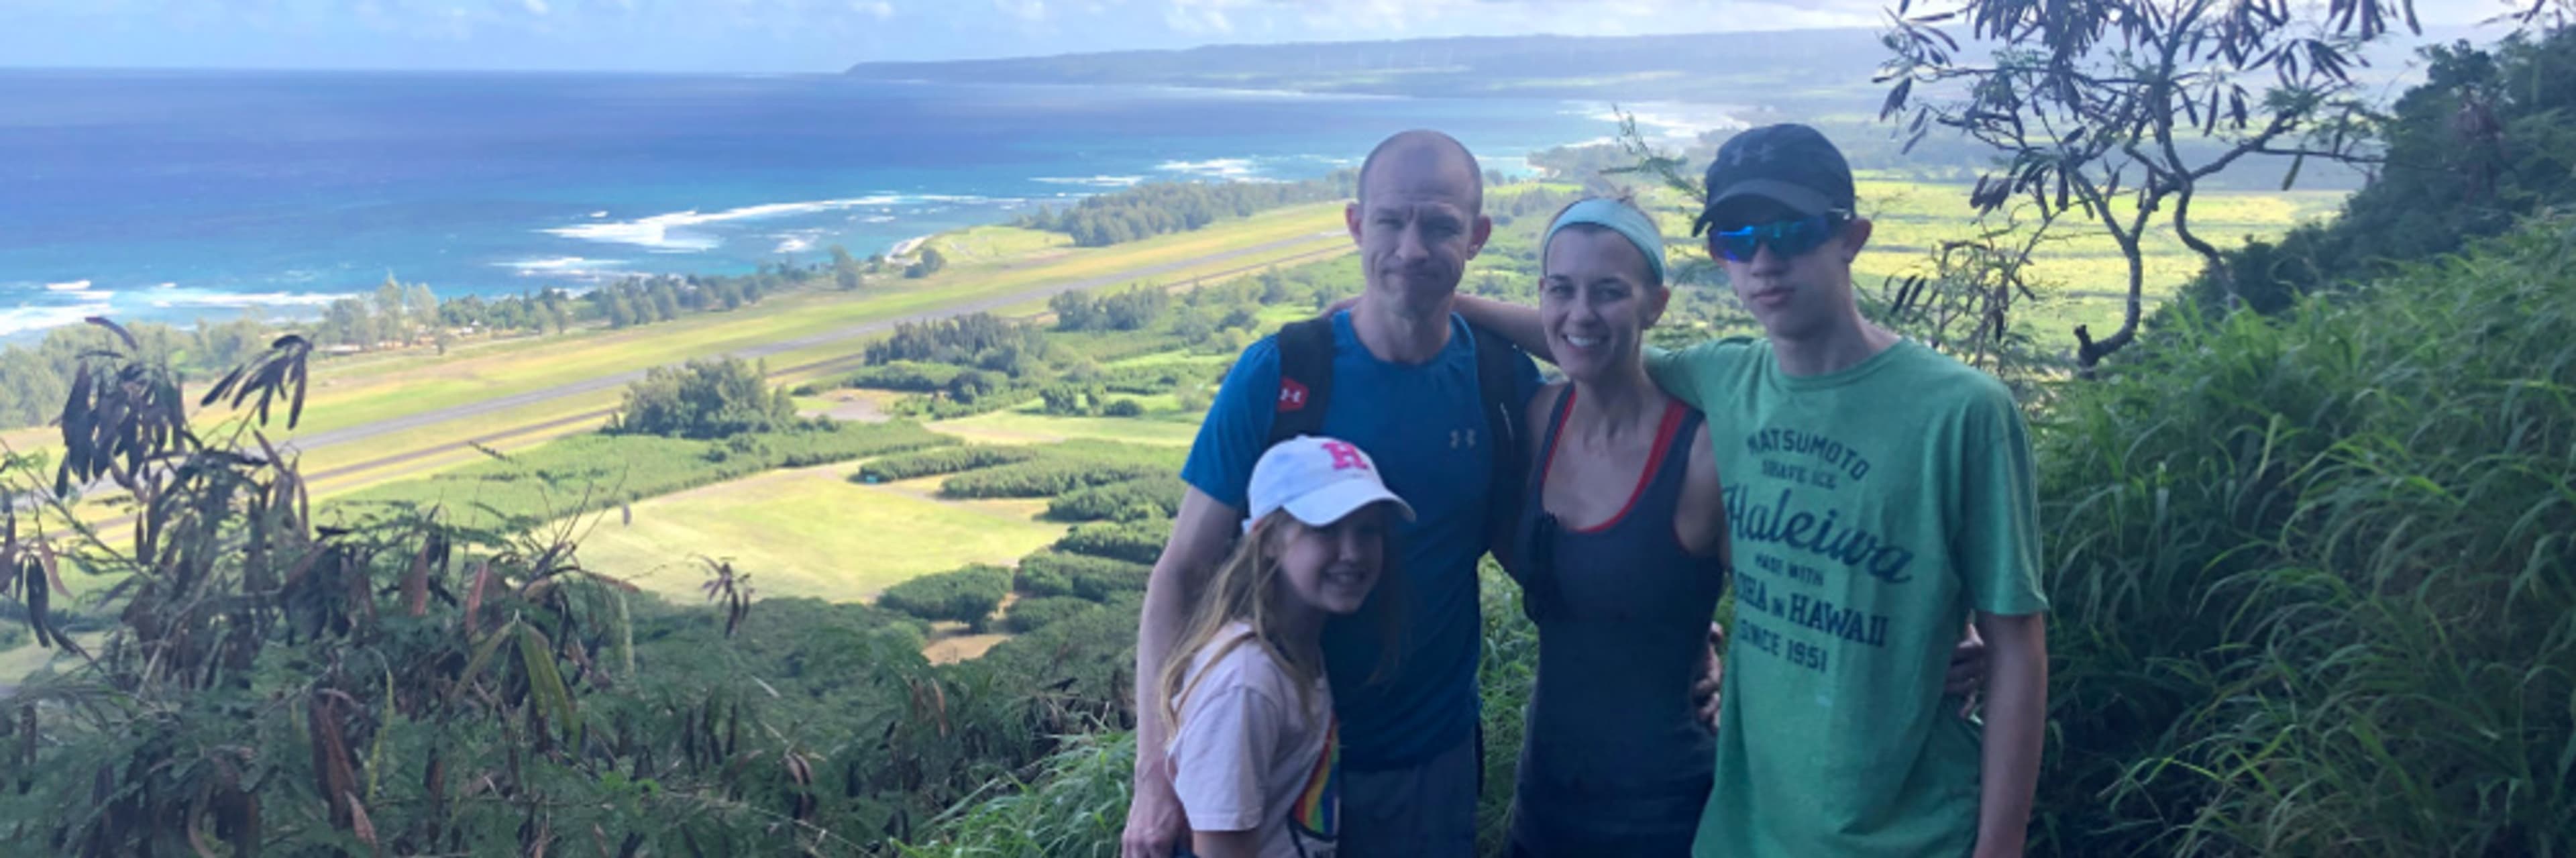 North Shore Tour Guide Hike